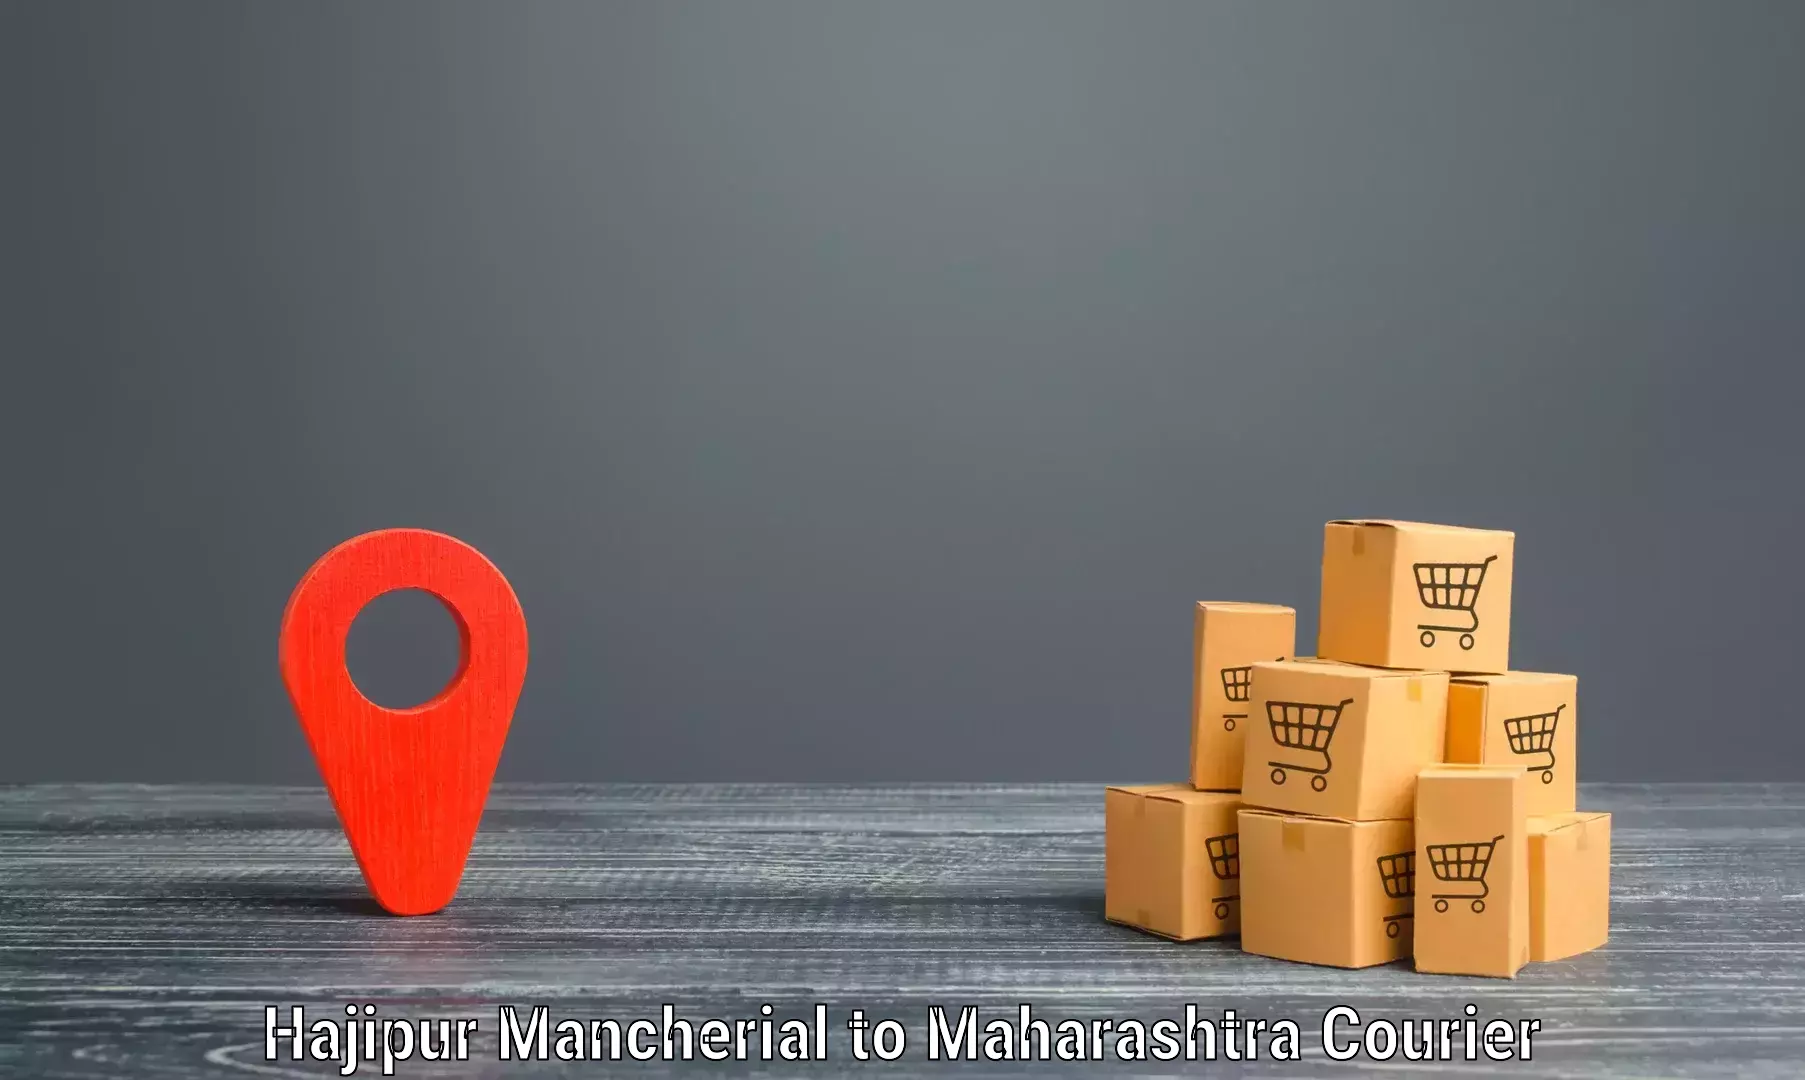 Courier tracking online Hajipur Mancherial to Sindhudurg